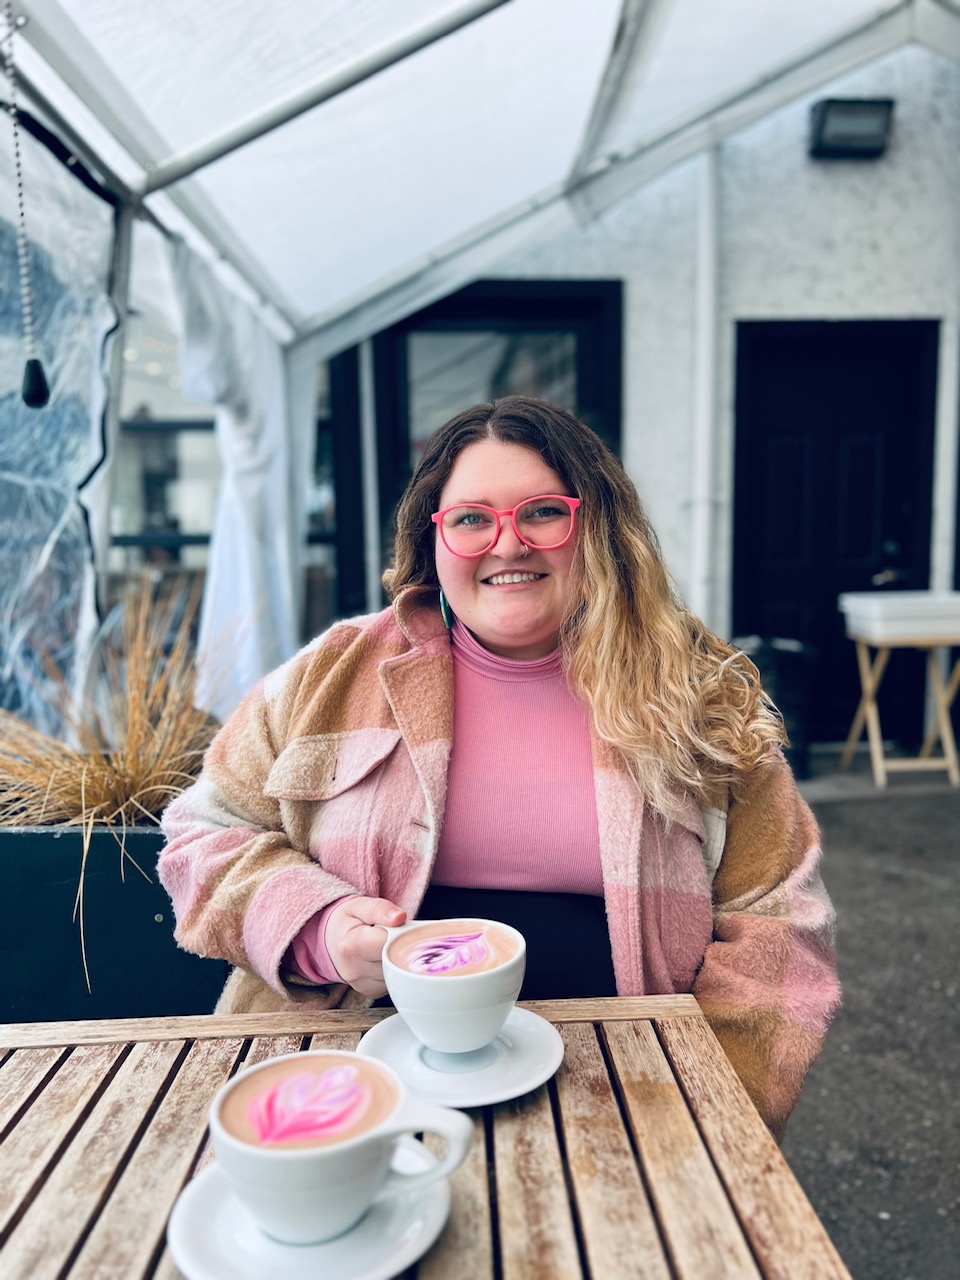 Smiling woman with long hair and glasses, seated at wooden table, wearing pink top and jacket, with cup of hot chocolate